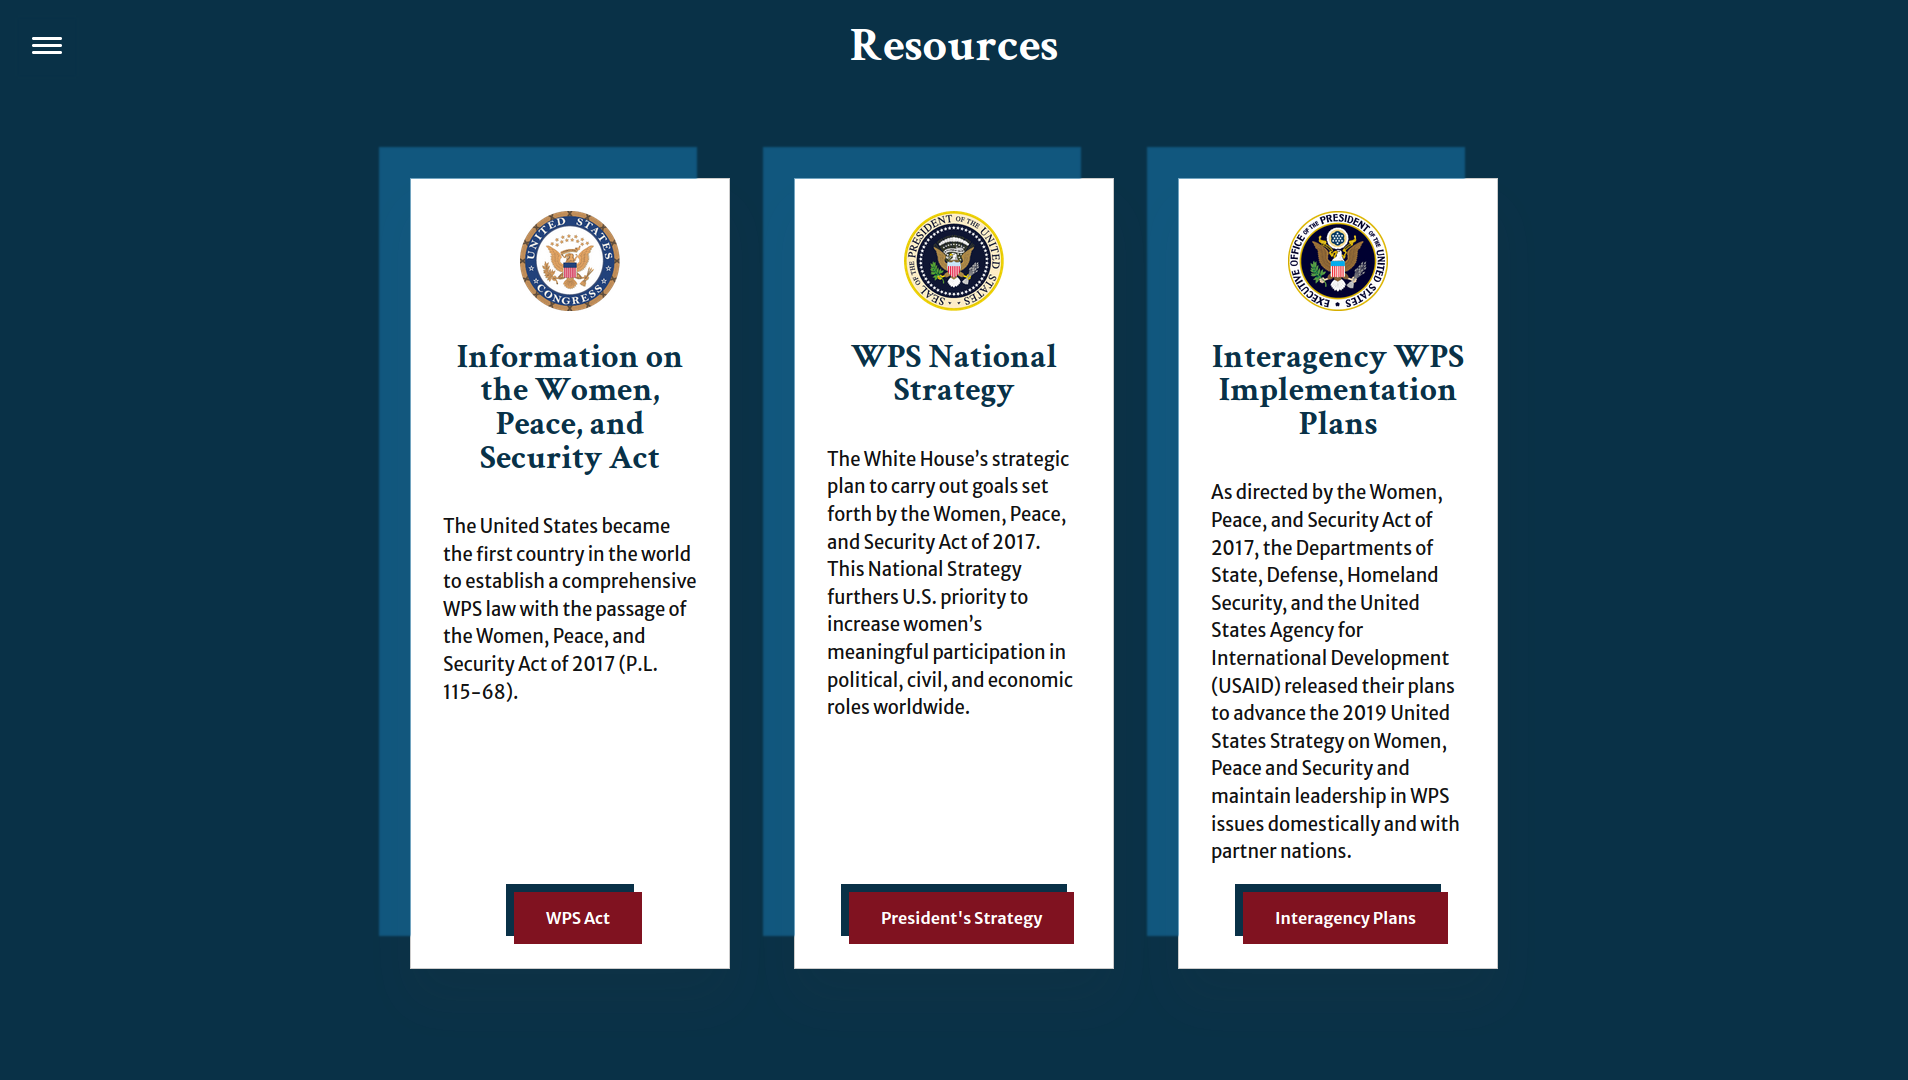 Women, Peace, and Security Caucus page resources section. Three cards with a seal, heading, text, and a call to action button.